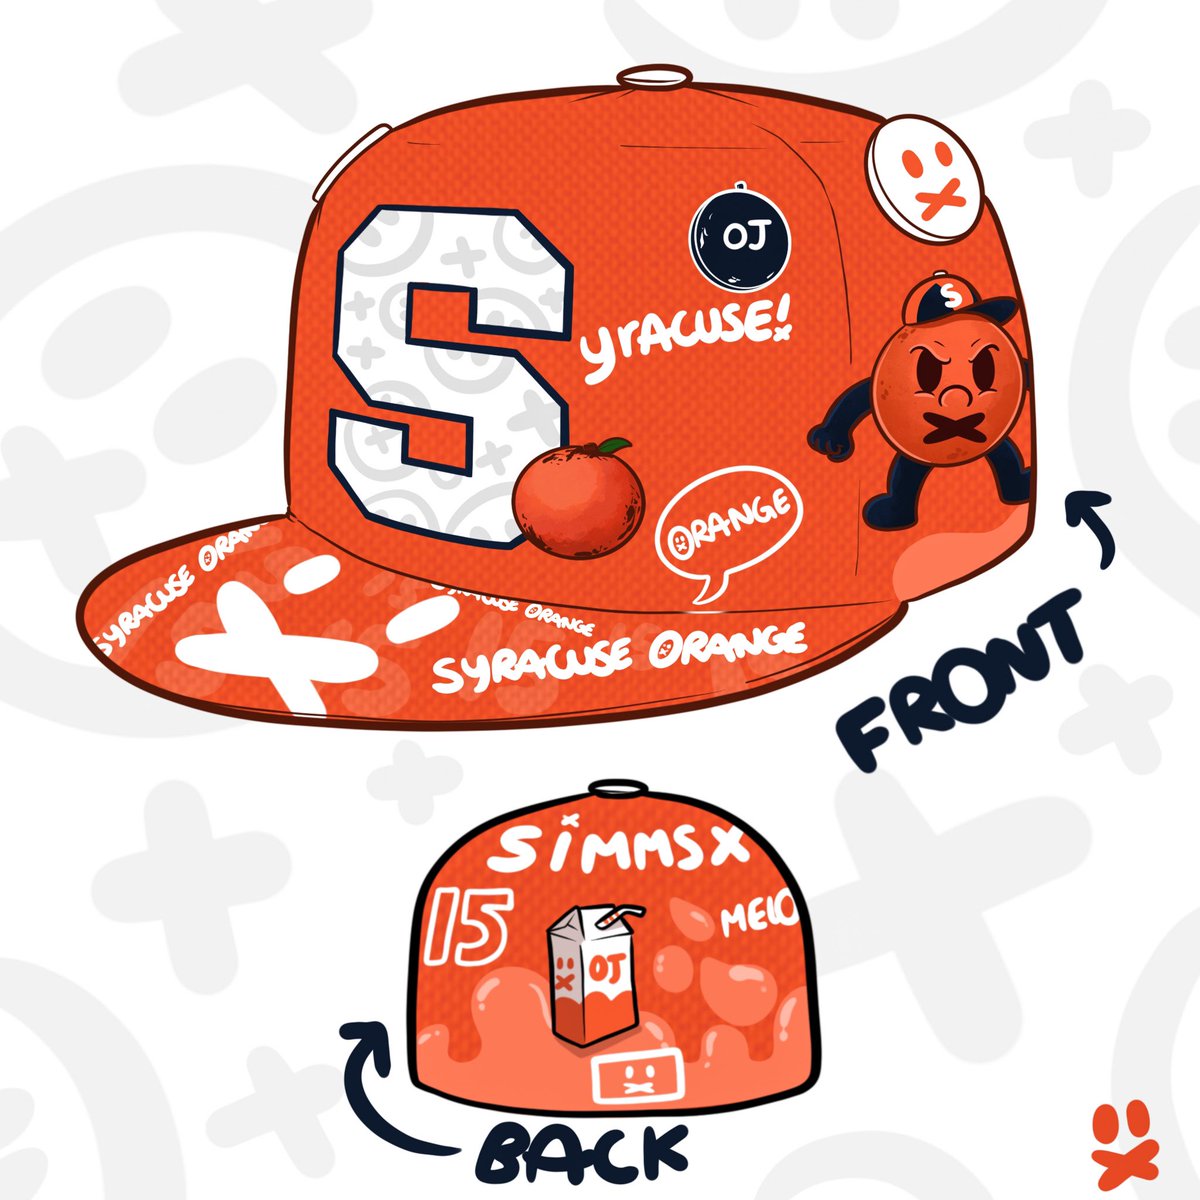 Whole fit together #art #ArtistOnTwitter #syracusebasketball #syracuse https://t.co/ur8YR91VRx